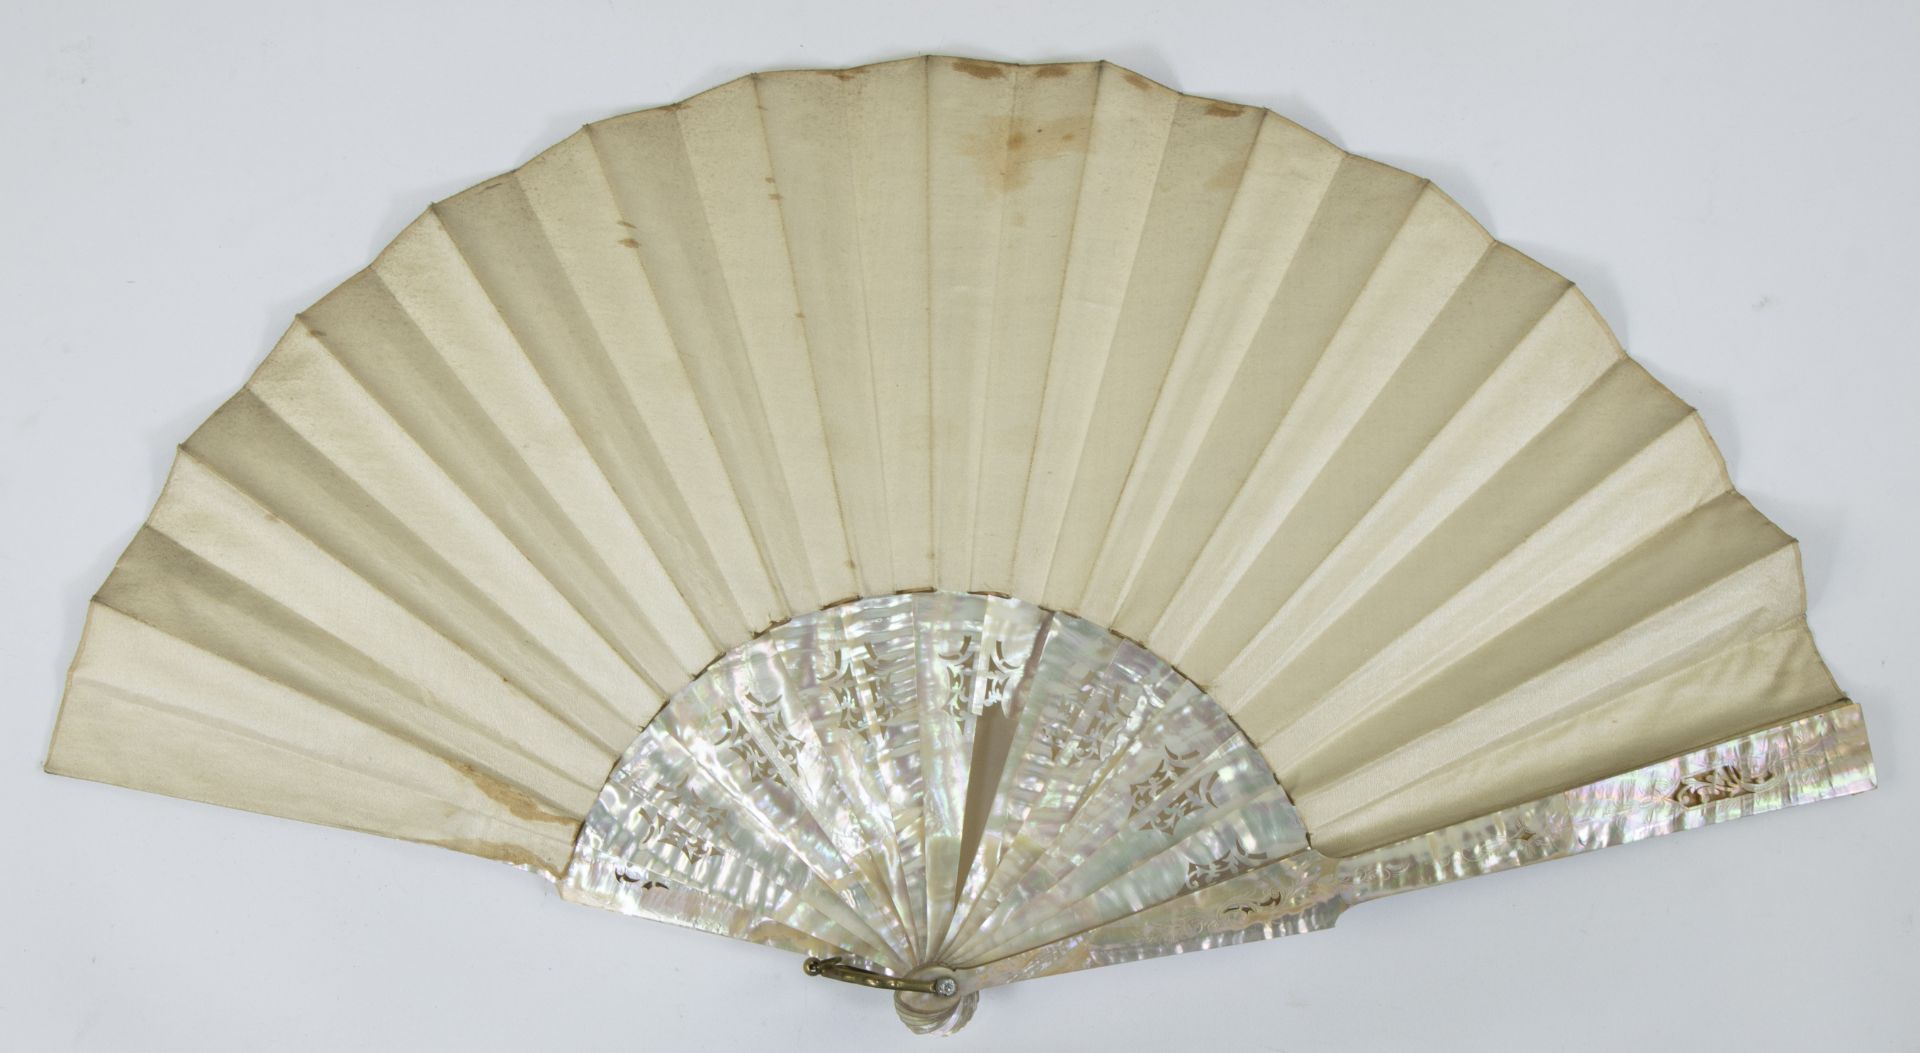 Set of 2 fans with hand-painted romantic decor, one signed and in a gilt Louis XV frame behind glass - Image 3 of 4